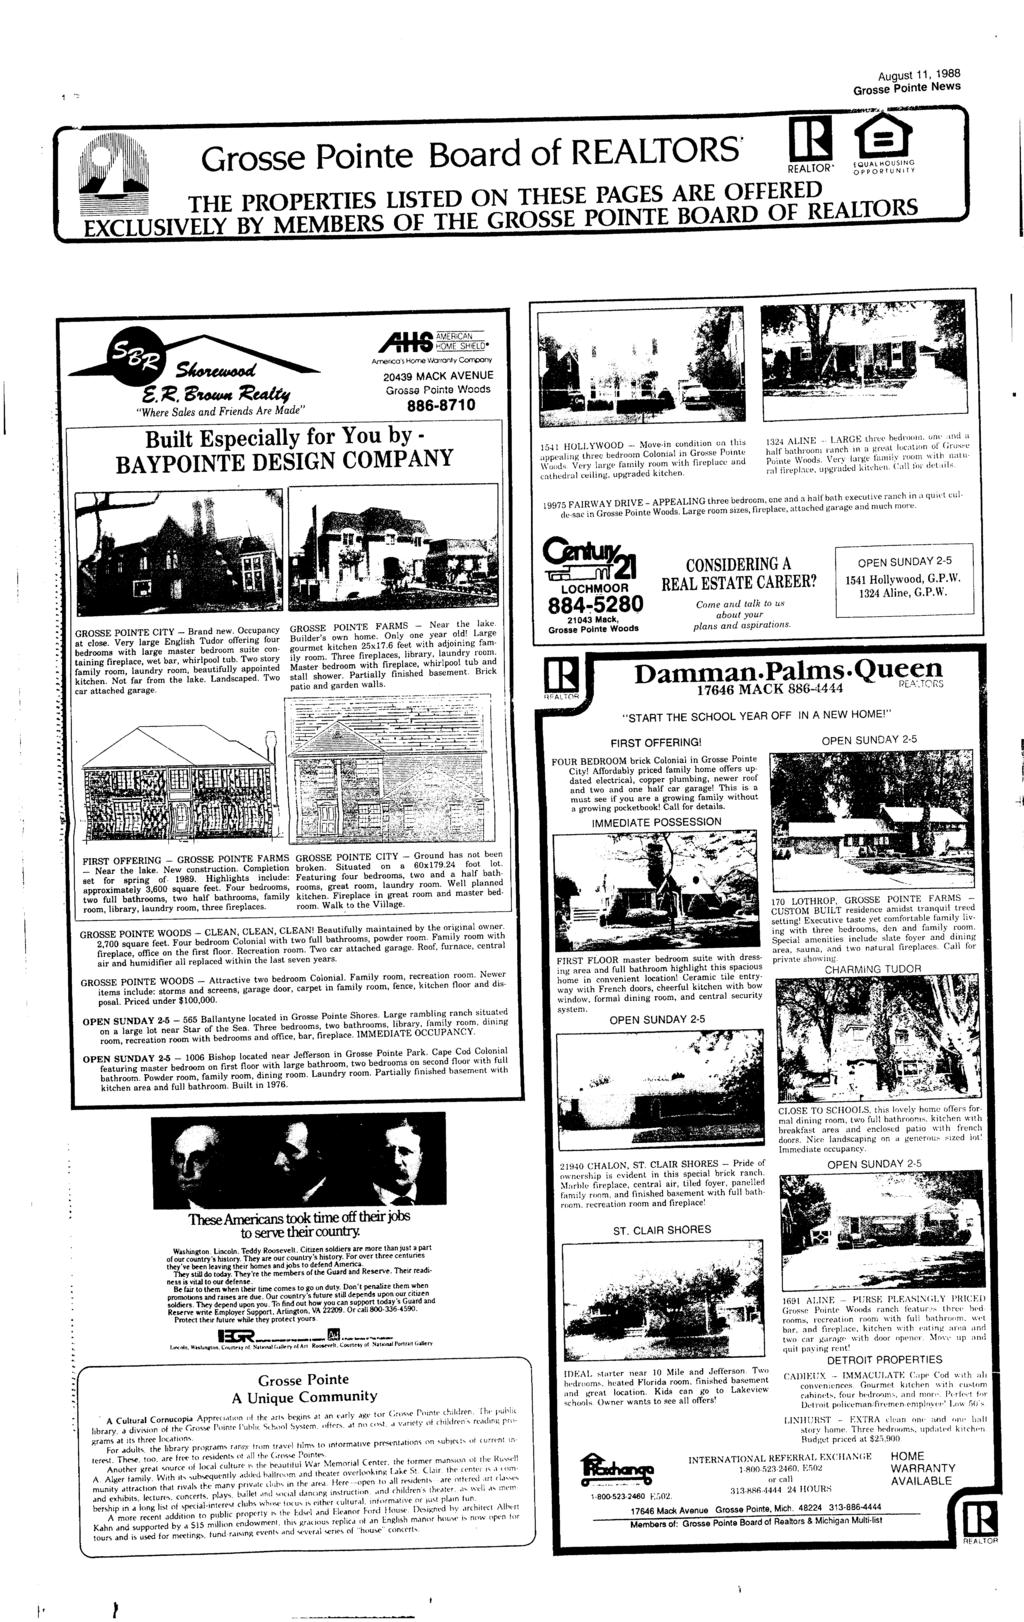 August 11, 1988 - Grosse Pointe Board of REALTORS' mrealtor' @ QUAL HOUSNG OPPOR1UN1Y THE PROPERTES LSTED ON THESE PAGES ARE OFFERED EXCLUSVELY BY MEMBERS OF THE GROSSE PONTE BOARD OF REALTORS.